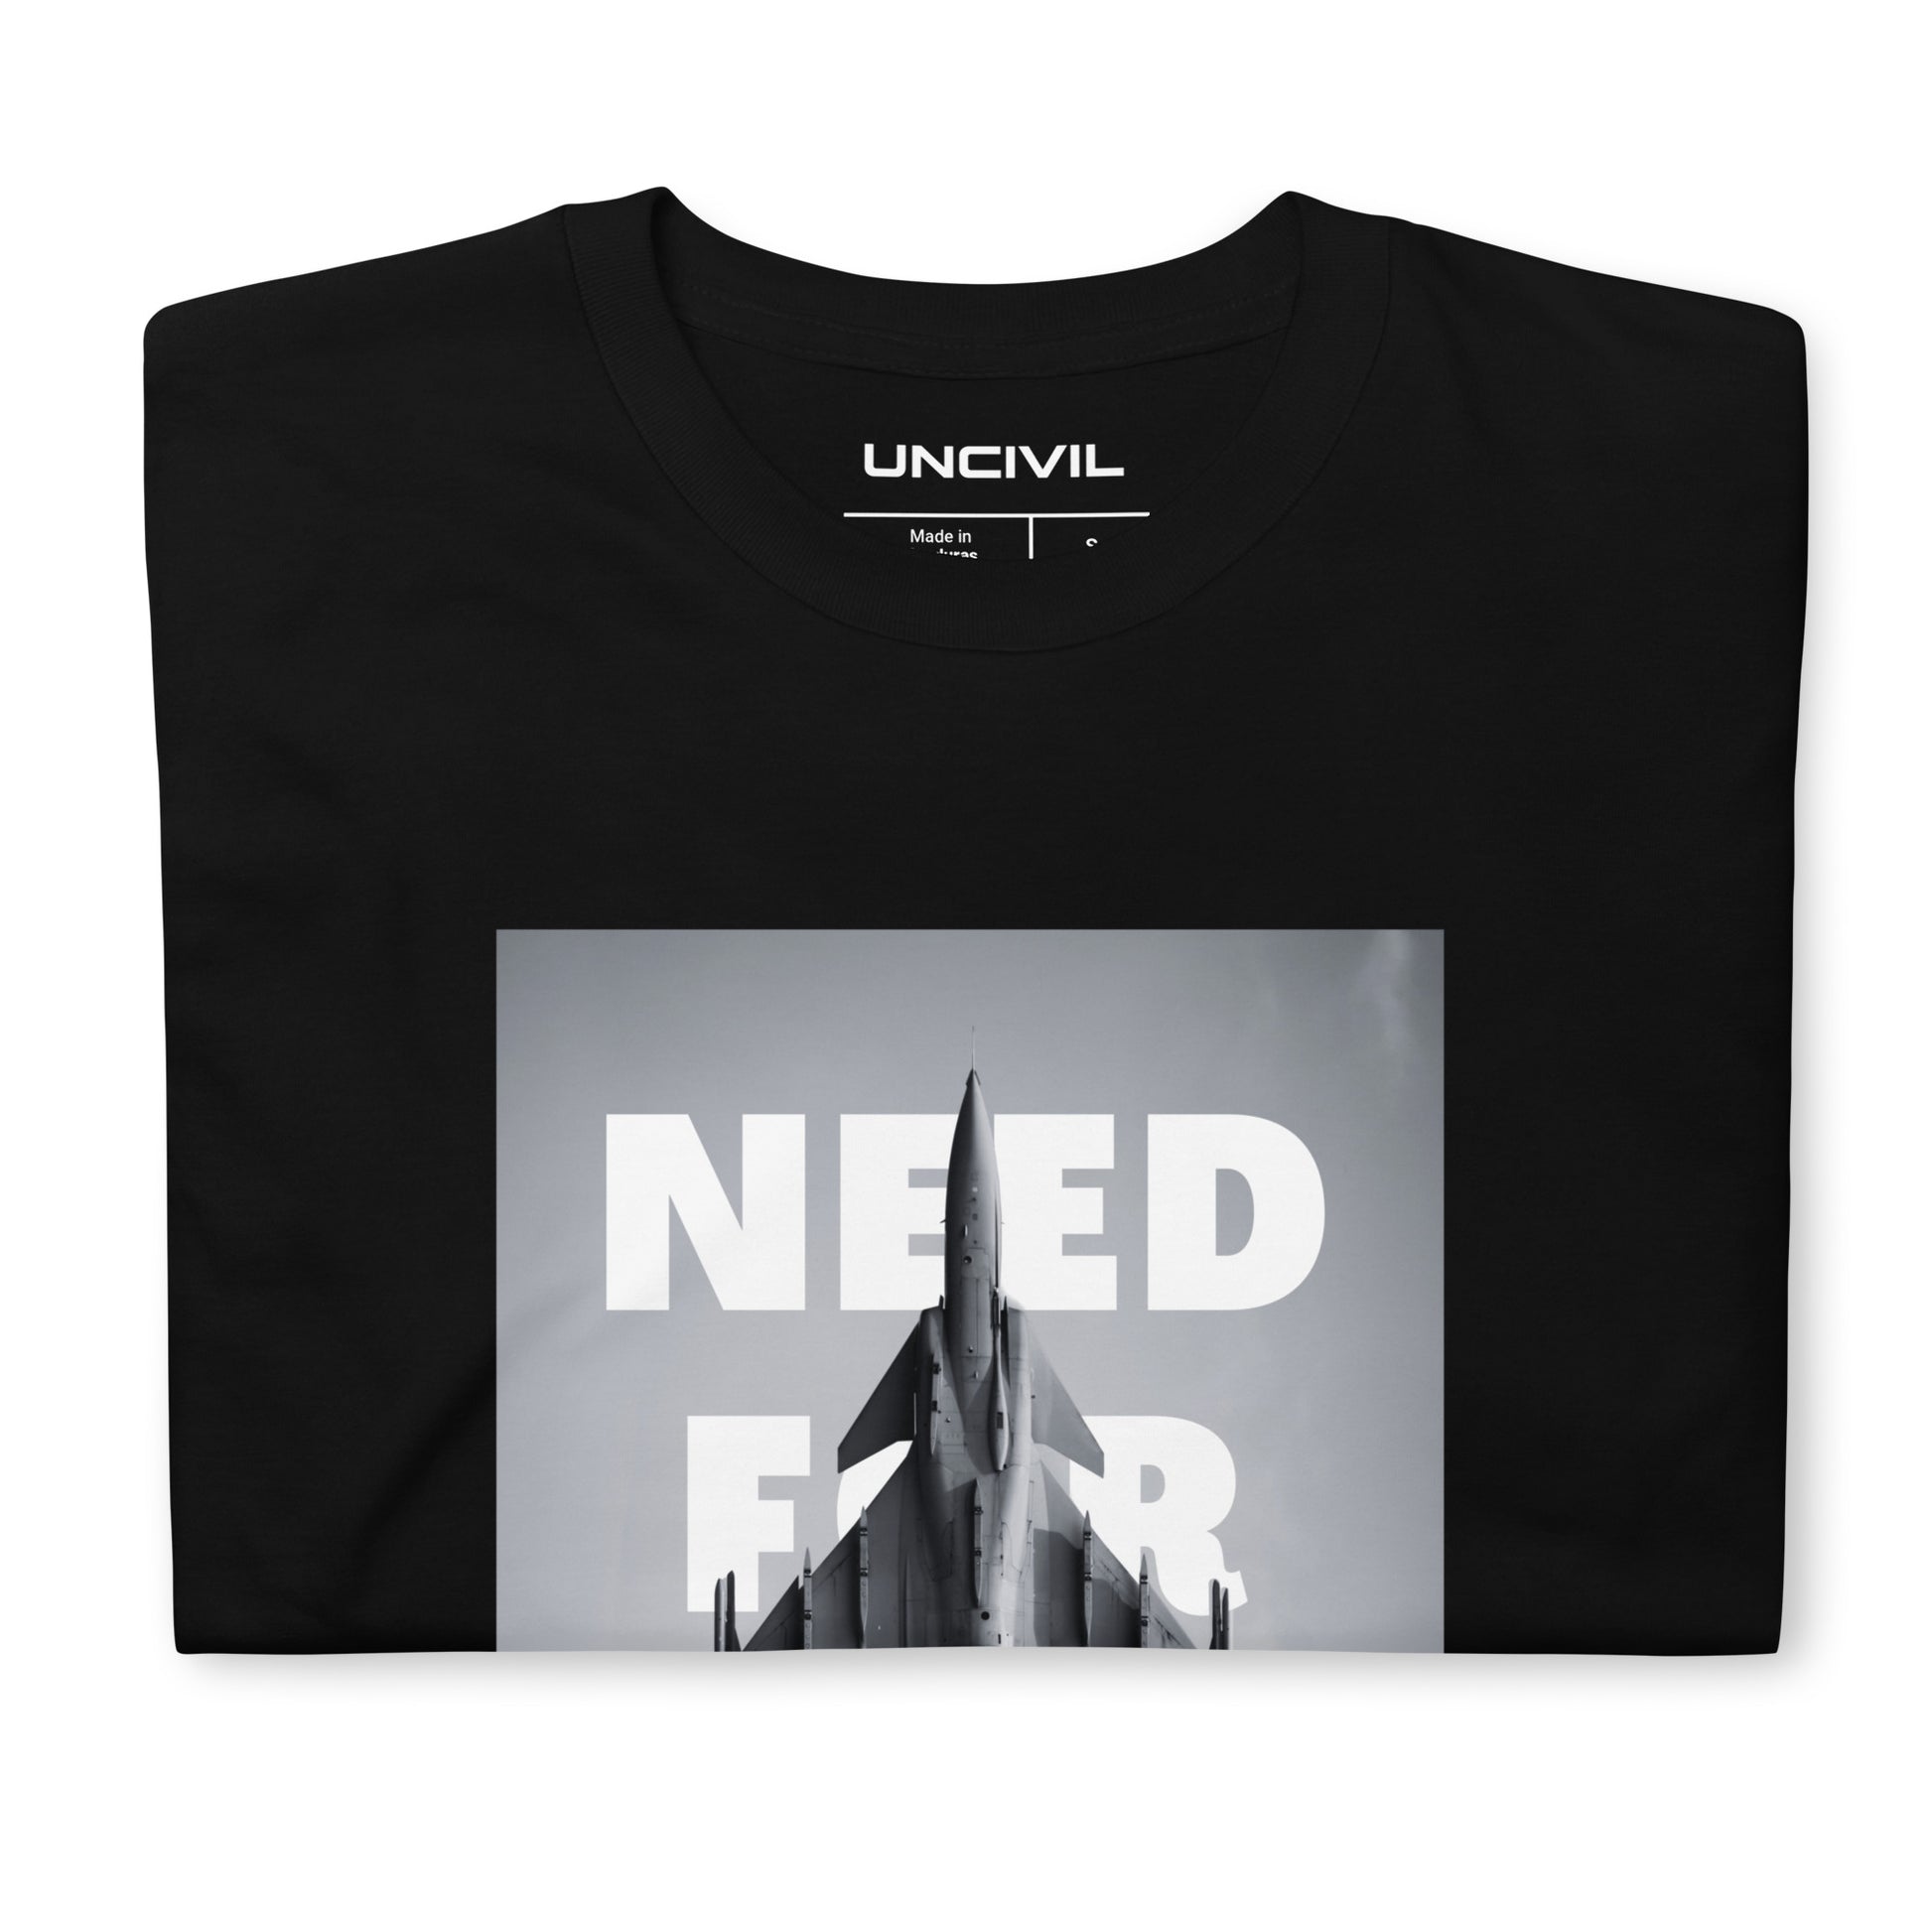 Our Need for Speed shirt features a graphic of a fighter jet.  Black unisex shirt.